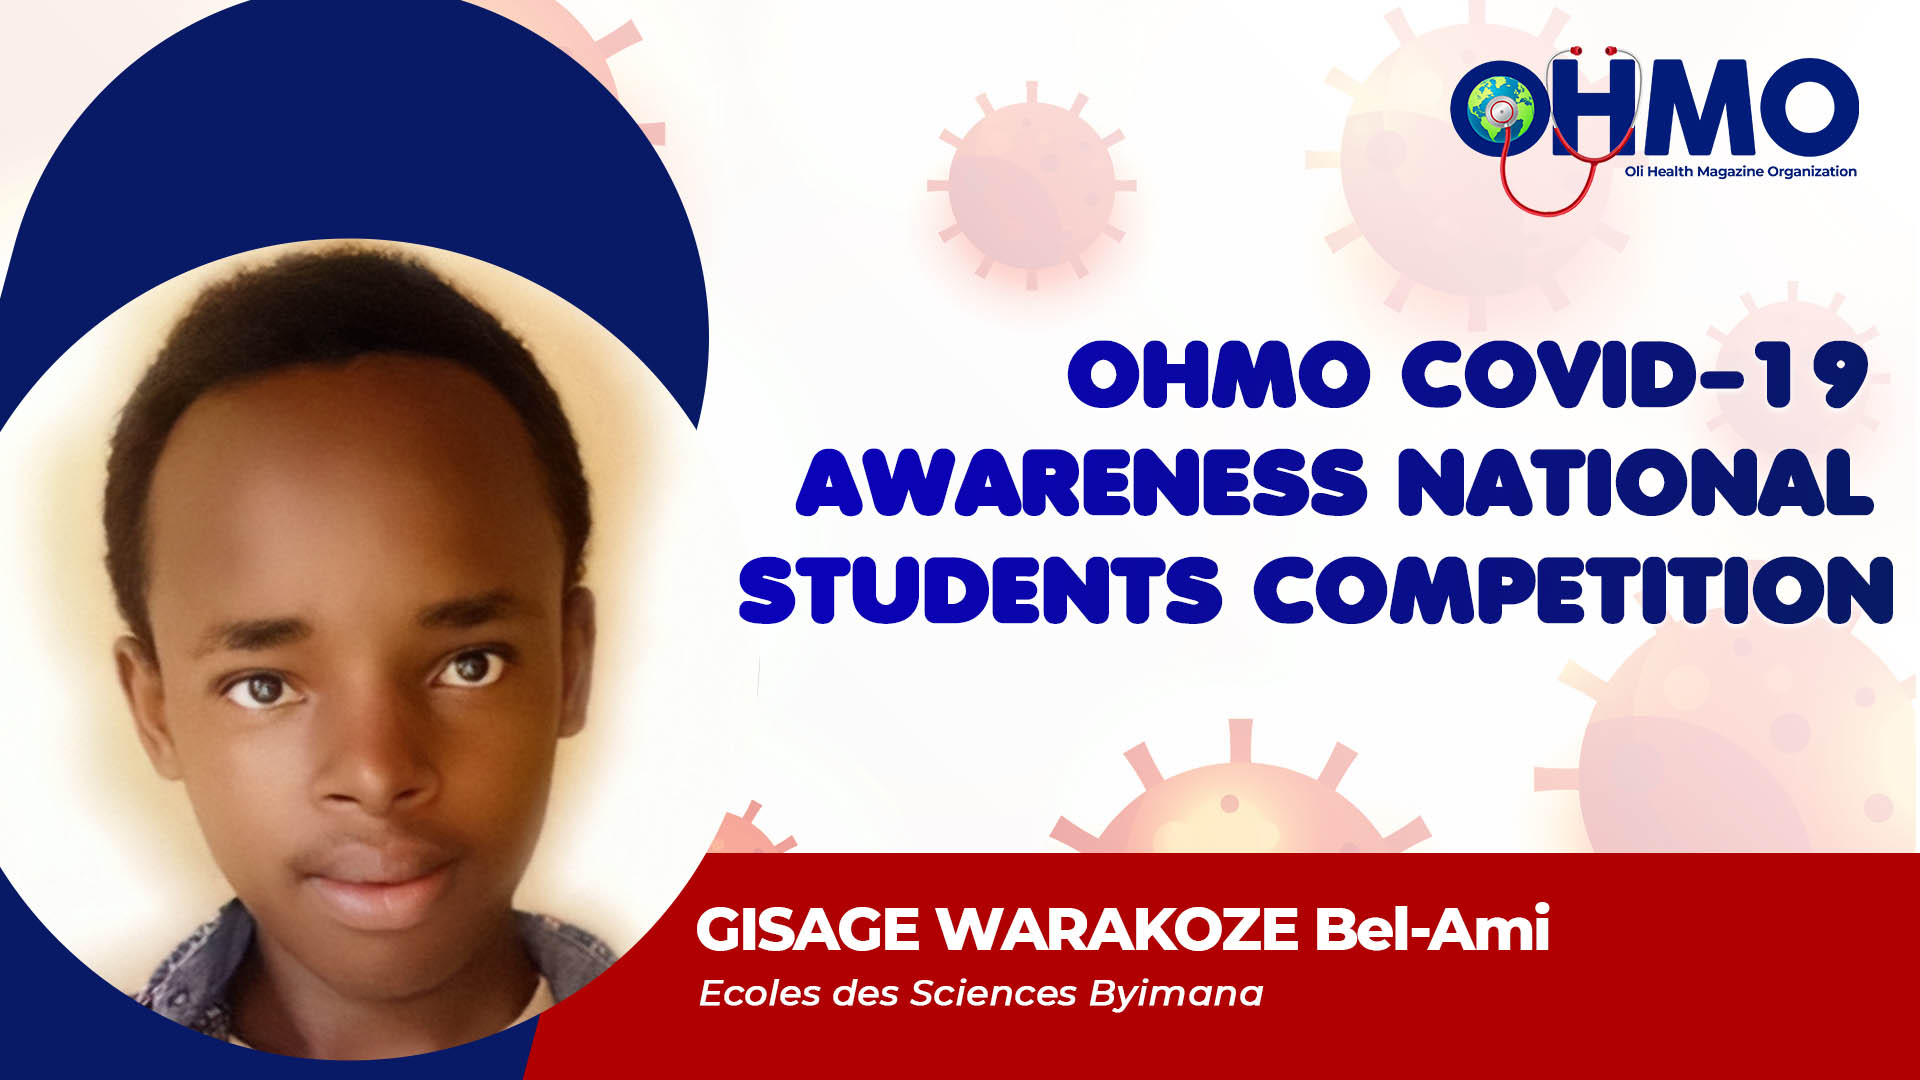 Mental Health, Self-Care and Coping with Coronavirus Disease (COVID-19) - GISAGE WARAKOZE Bel-Ami from Ecoles Des Sciences Byimana (ENTRY 56)